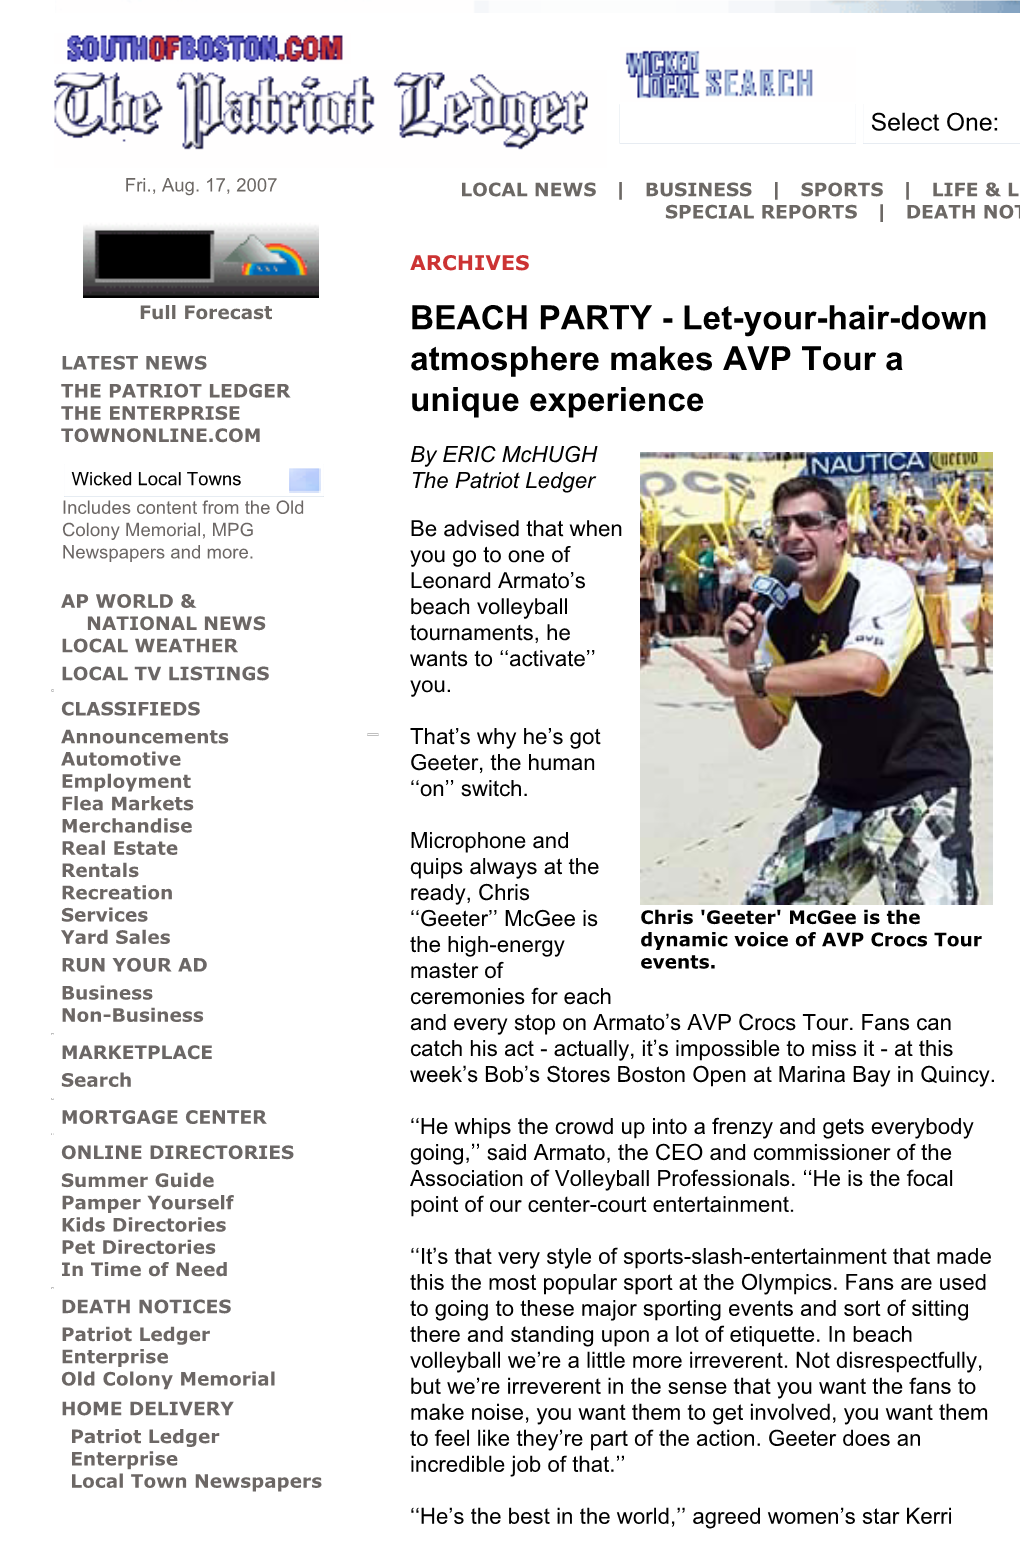 Let-Your-Hair-Down Atmosphere Makes AVP Tour a Unique Experience Page 1 of 4